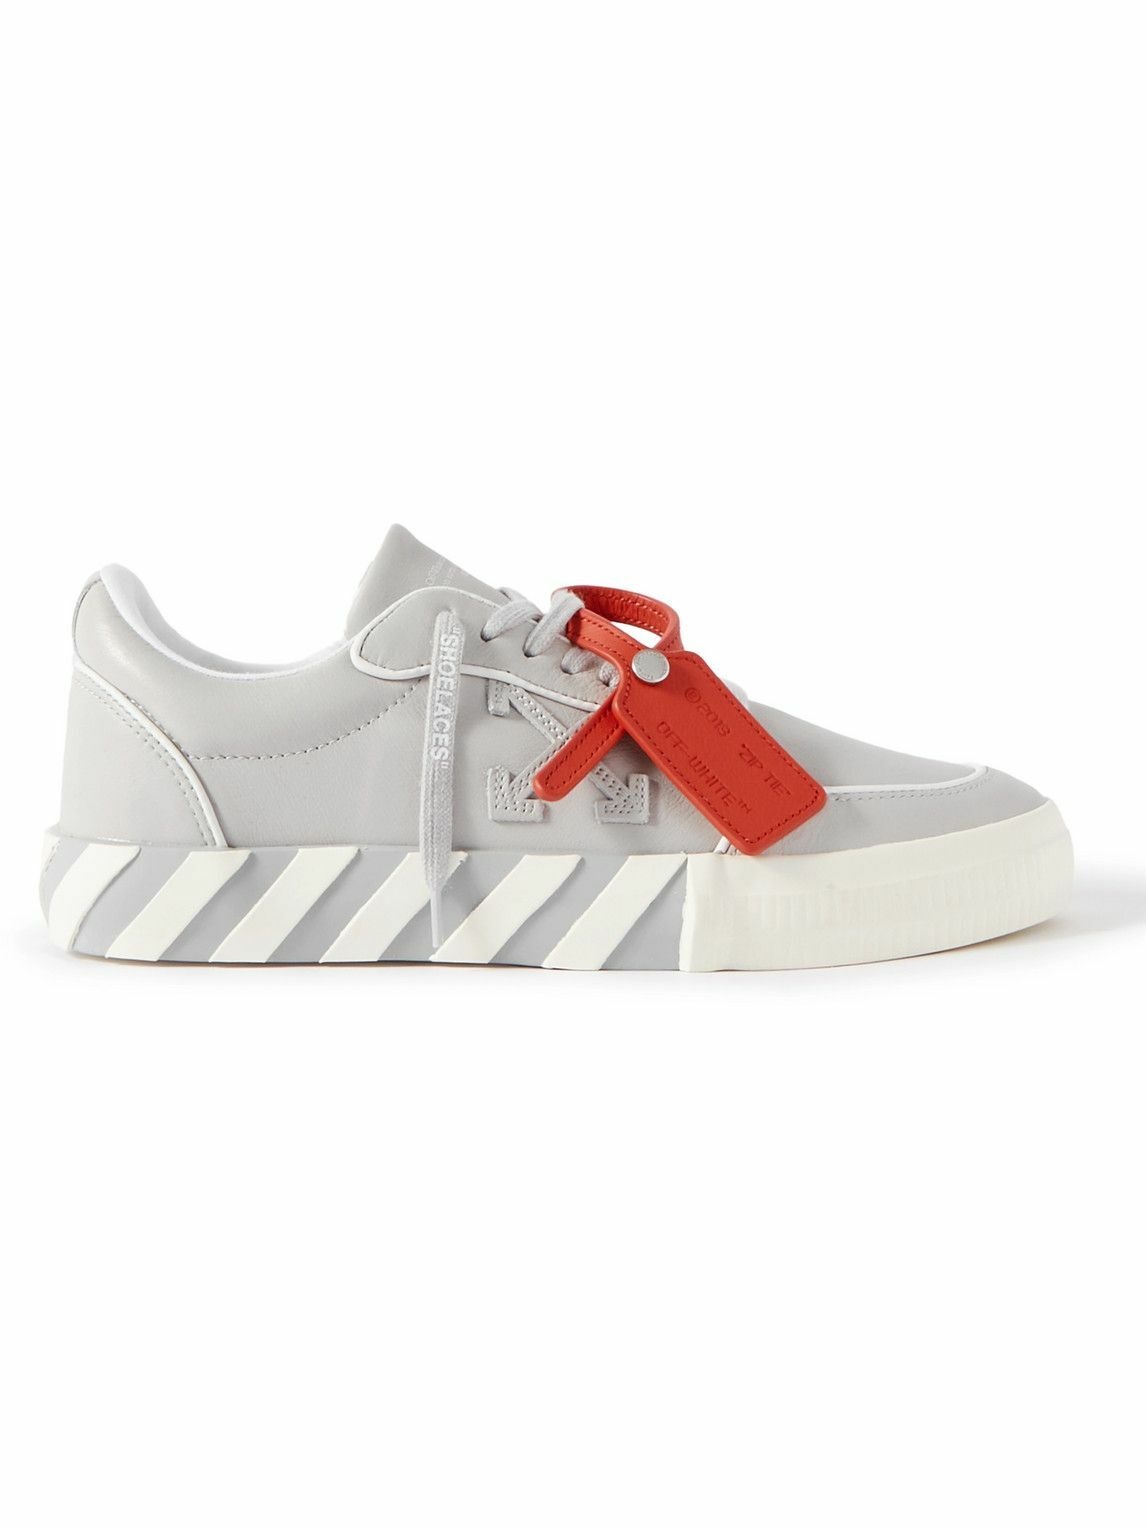 Off-White - Full-Grain Leather Sneakers - Gray Off-White